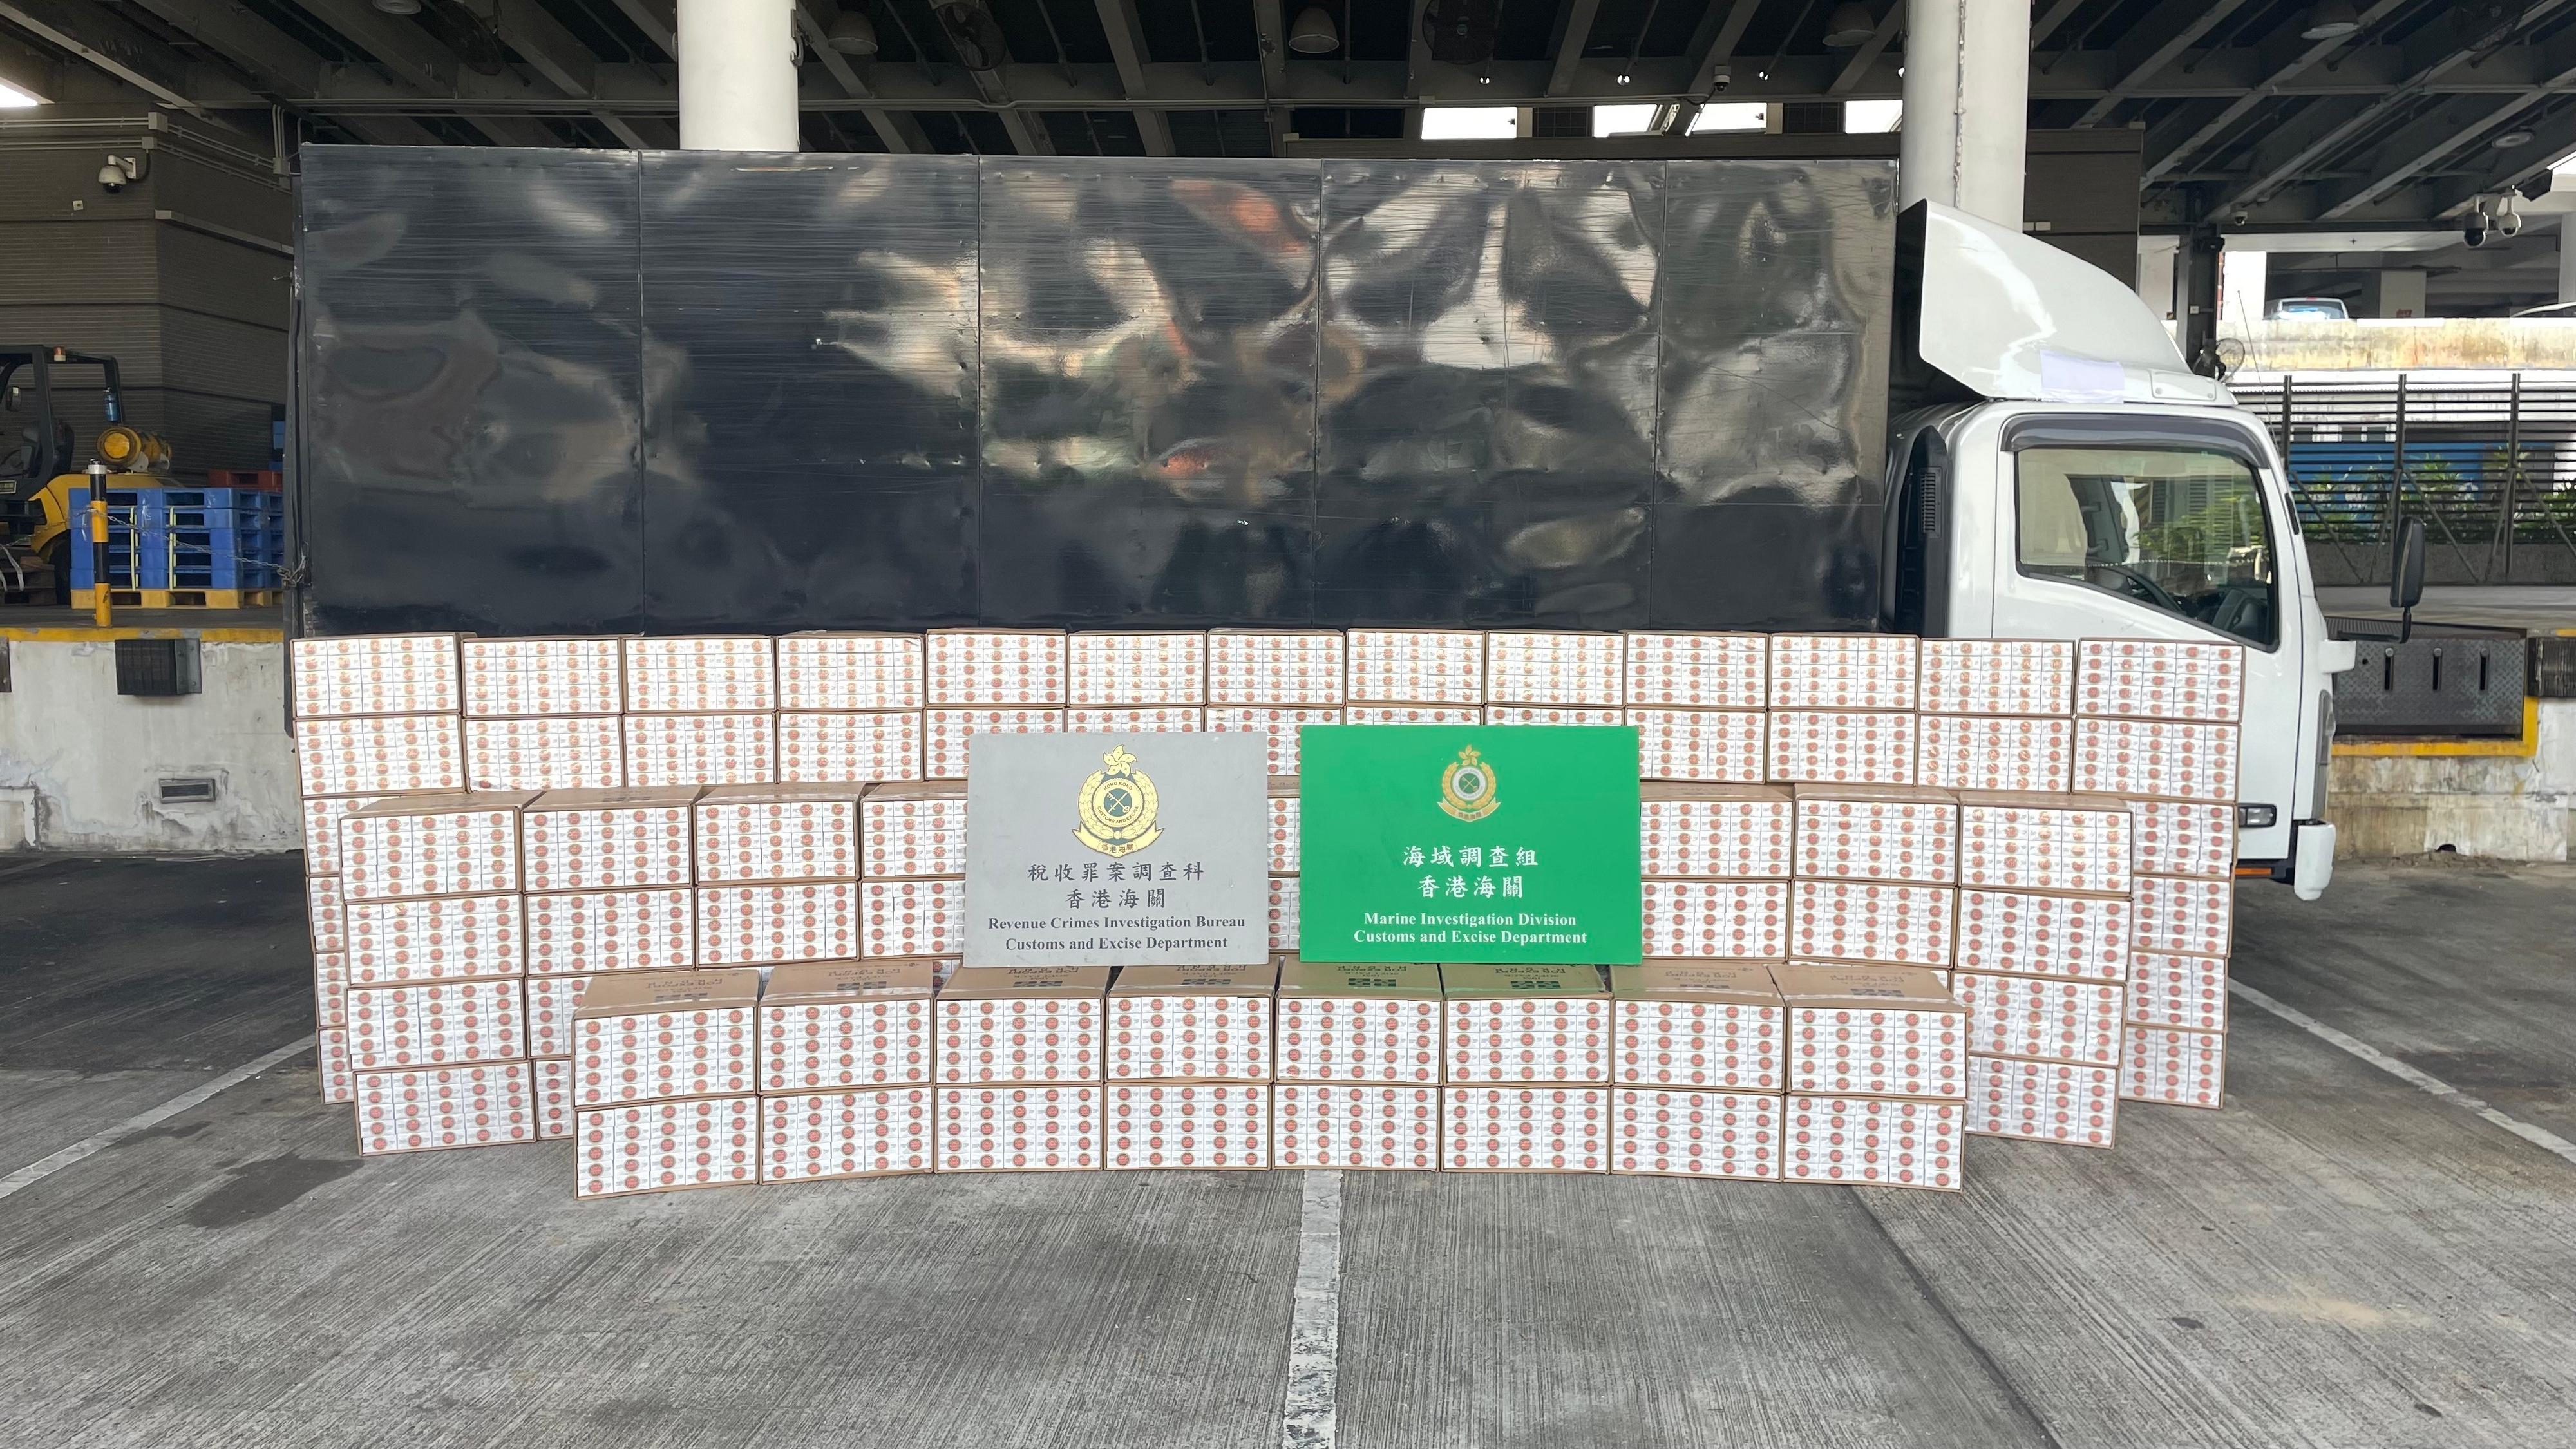 Hong Kong Customs and Marine Police conducted a joint operation in Sai Kung yesterday (September 21) and seized about 2.2 million suspected illicit cigarettes with an estimated market value of about $8.2 million and a duty potential of about $5.6 million. Photo shows the suspected illicit cigarettes seized and the detained lorry suspected to be connected with the case.